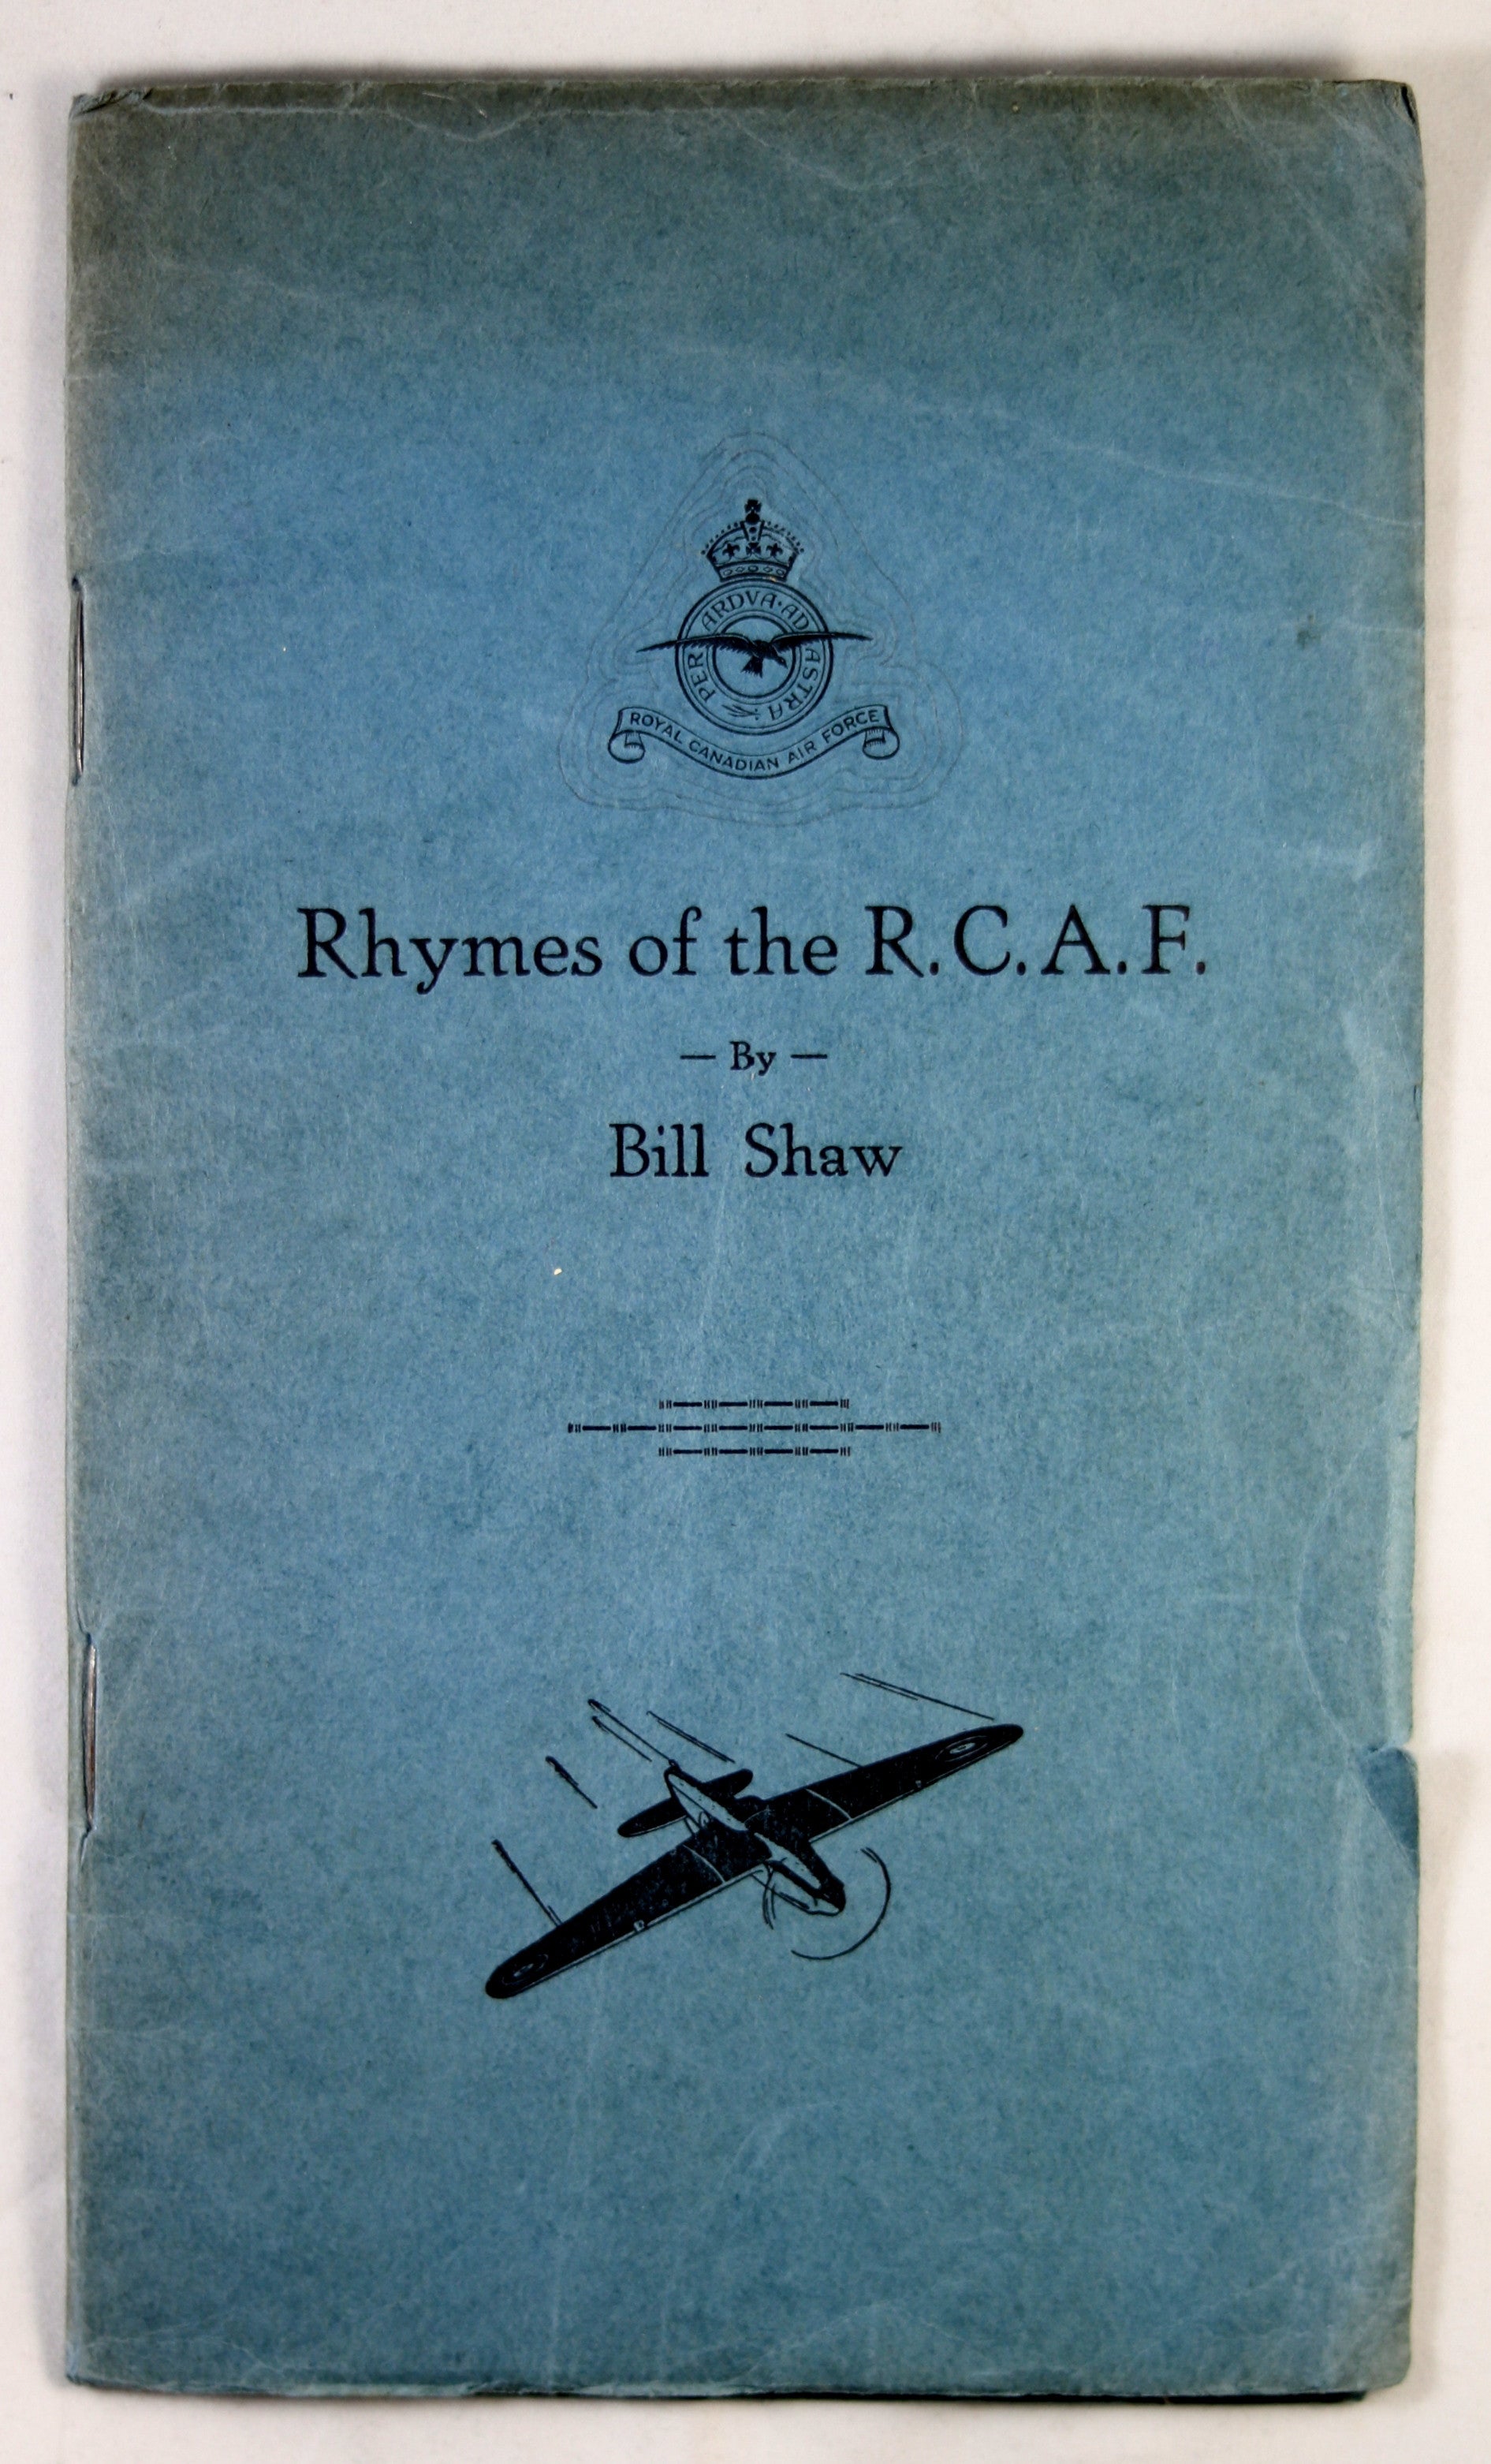 WW2 poetry book ‘Rhymes of the R.C.A.F.’ by Bill Shaw